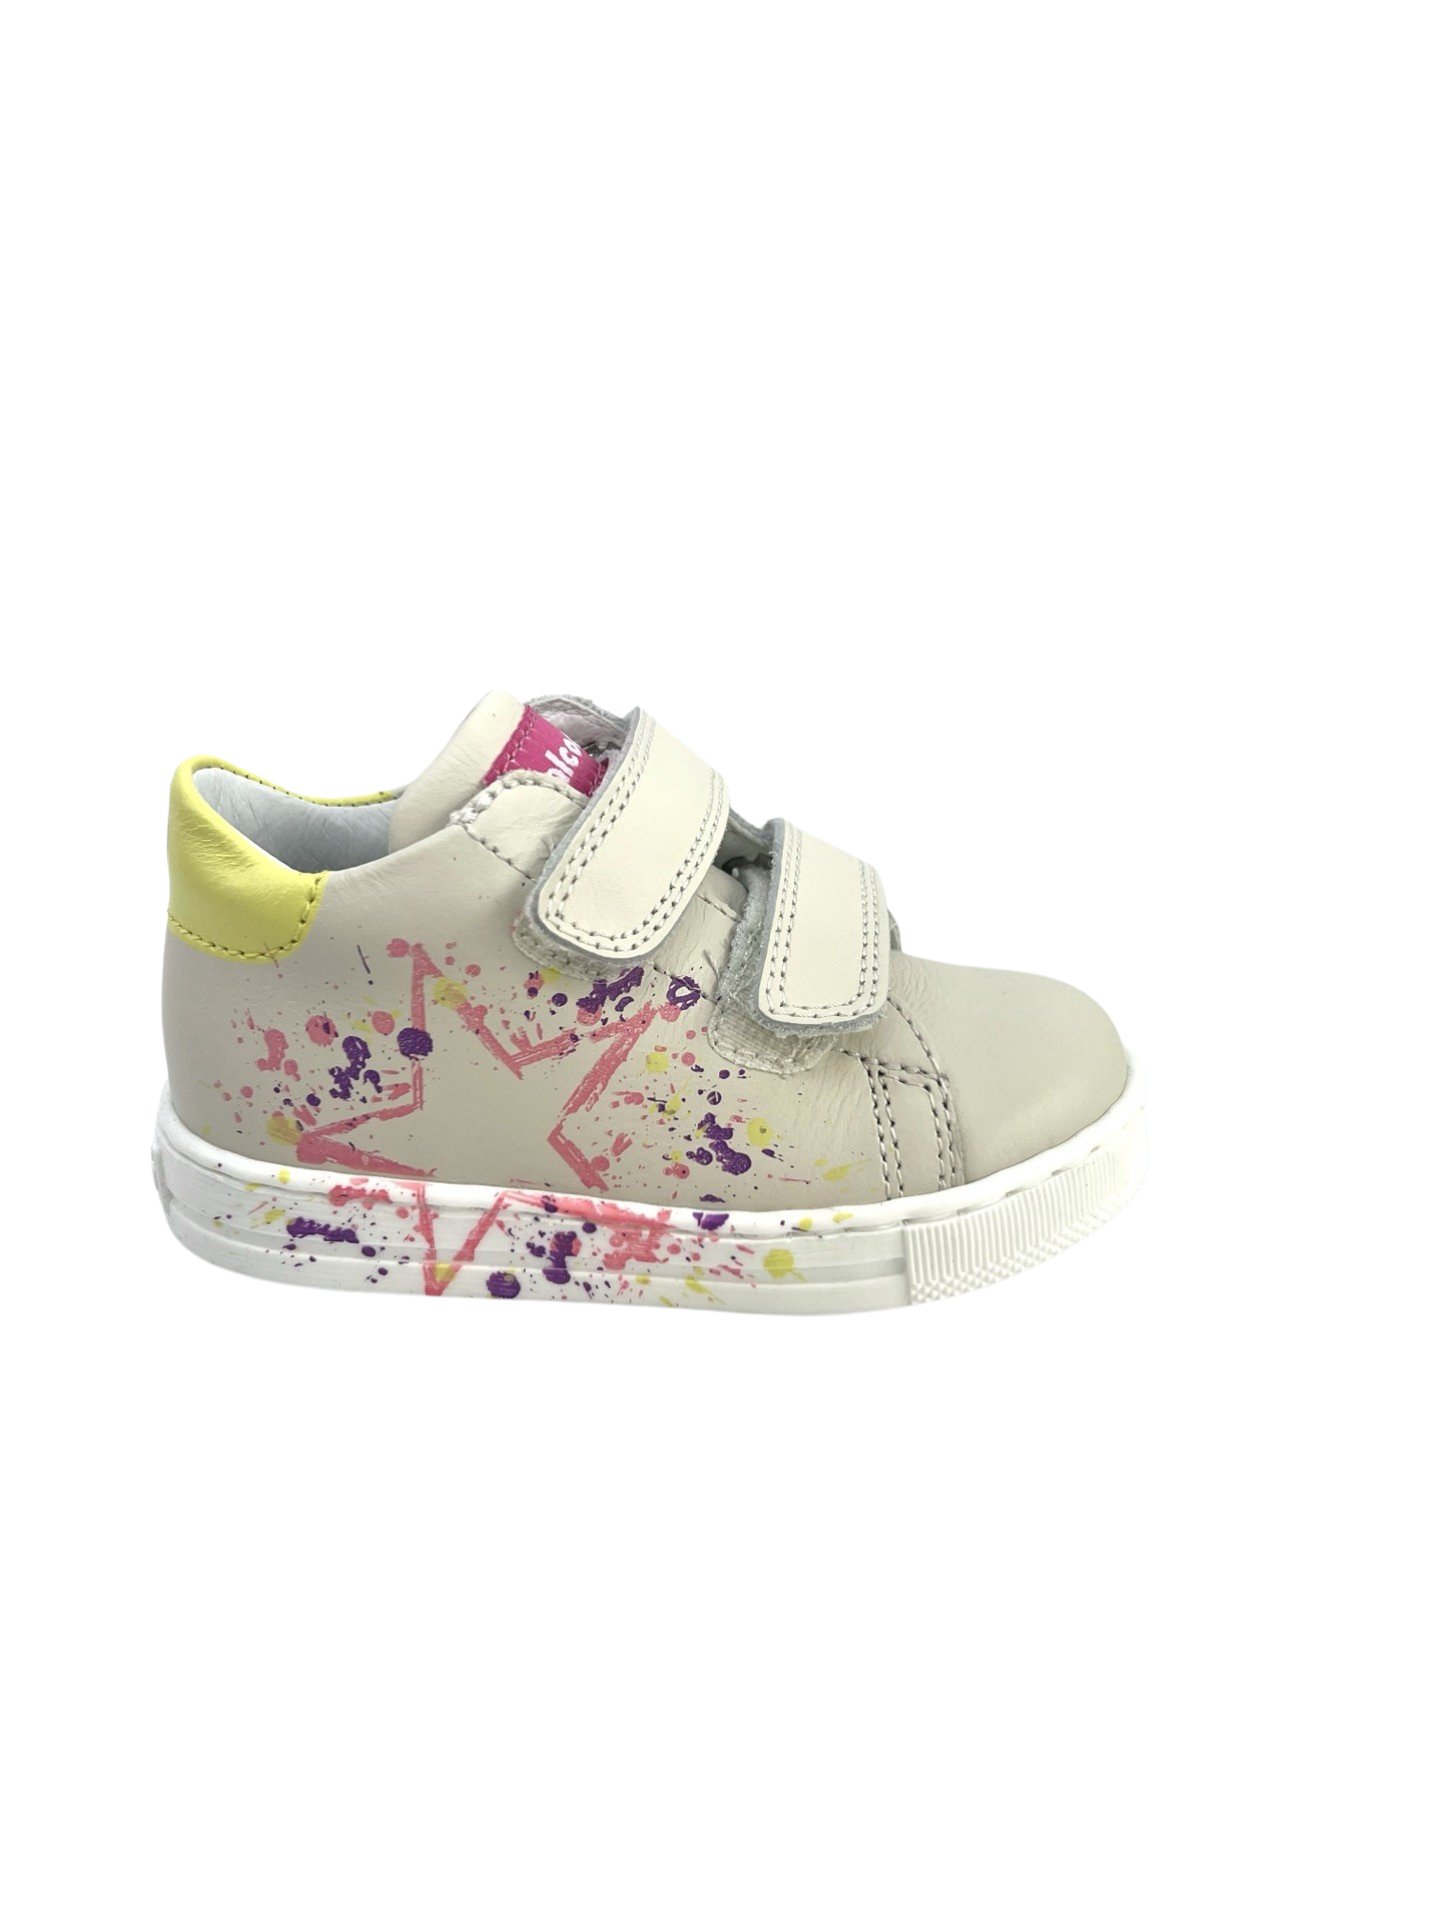 Falcotto Milk Double Velcro Baby Sneaker with Pink Star Print- Lacus